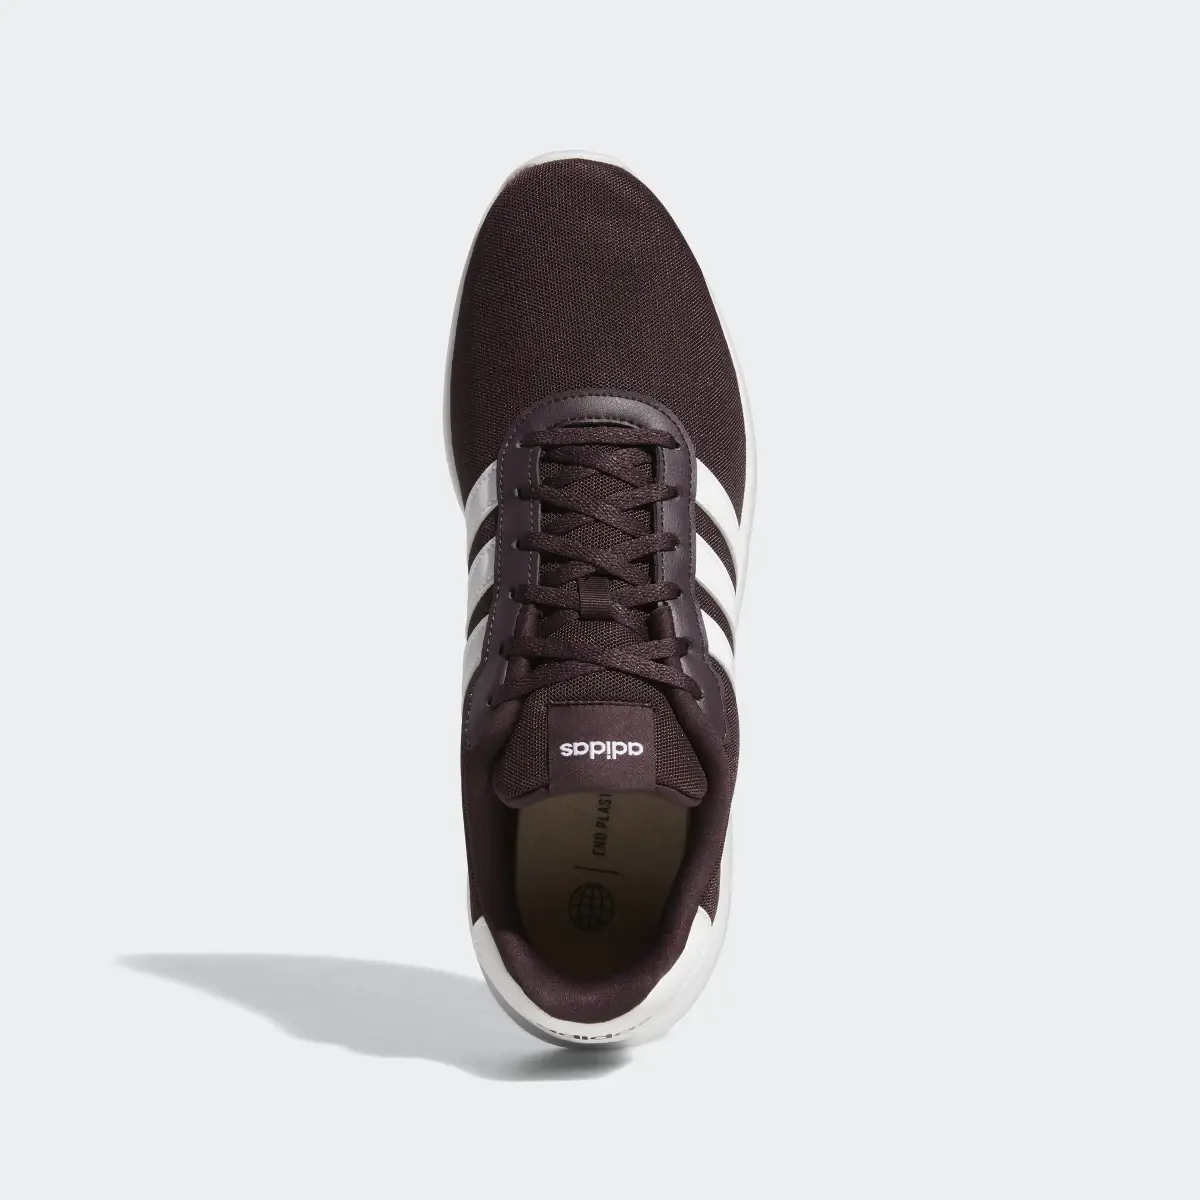 Adidas Lite Racer 3.0 Shoes. 3